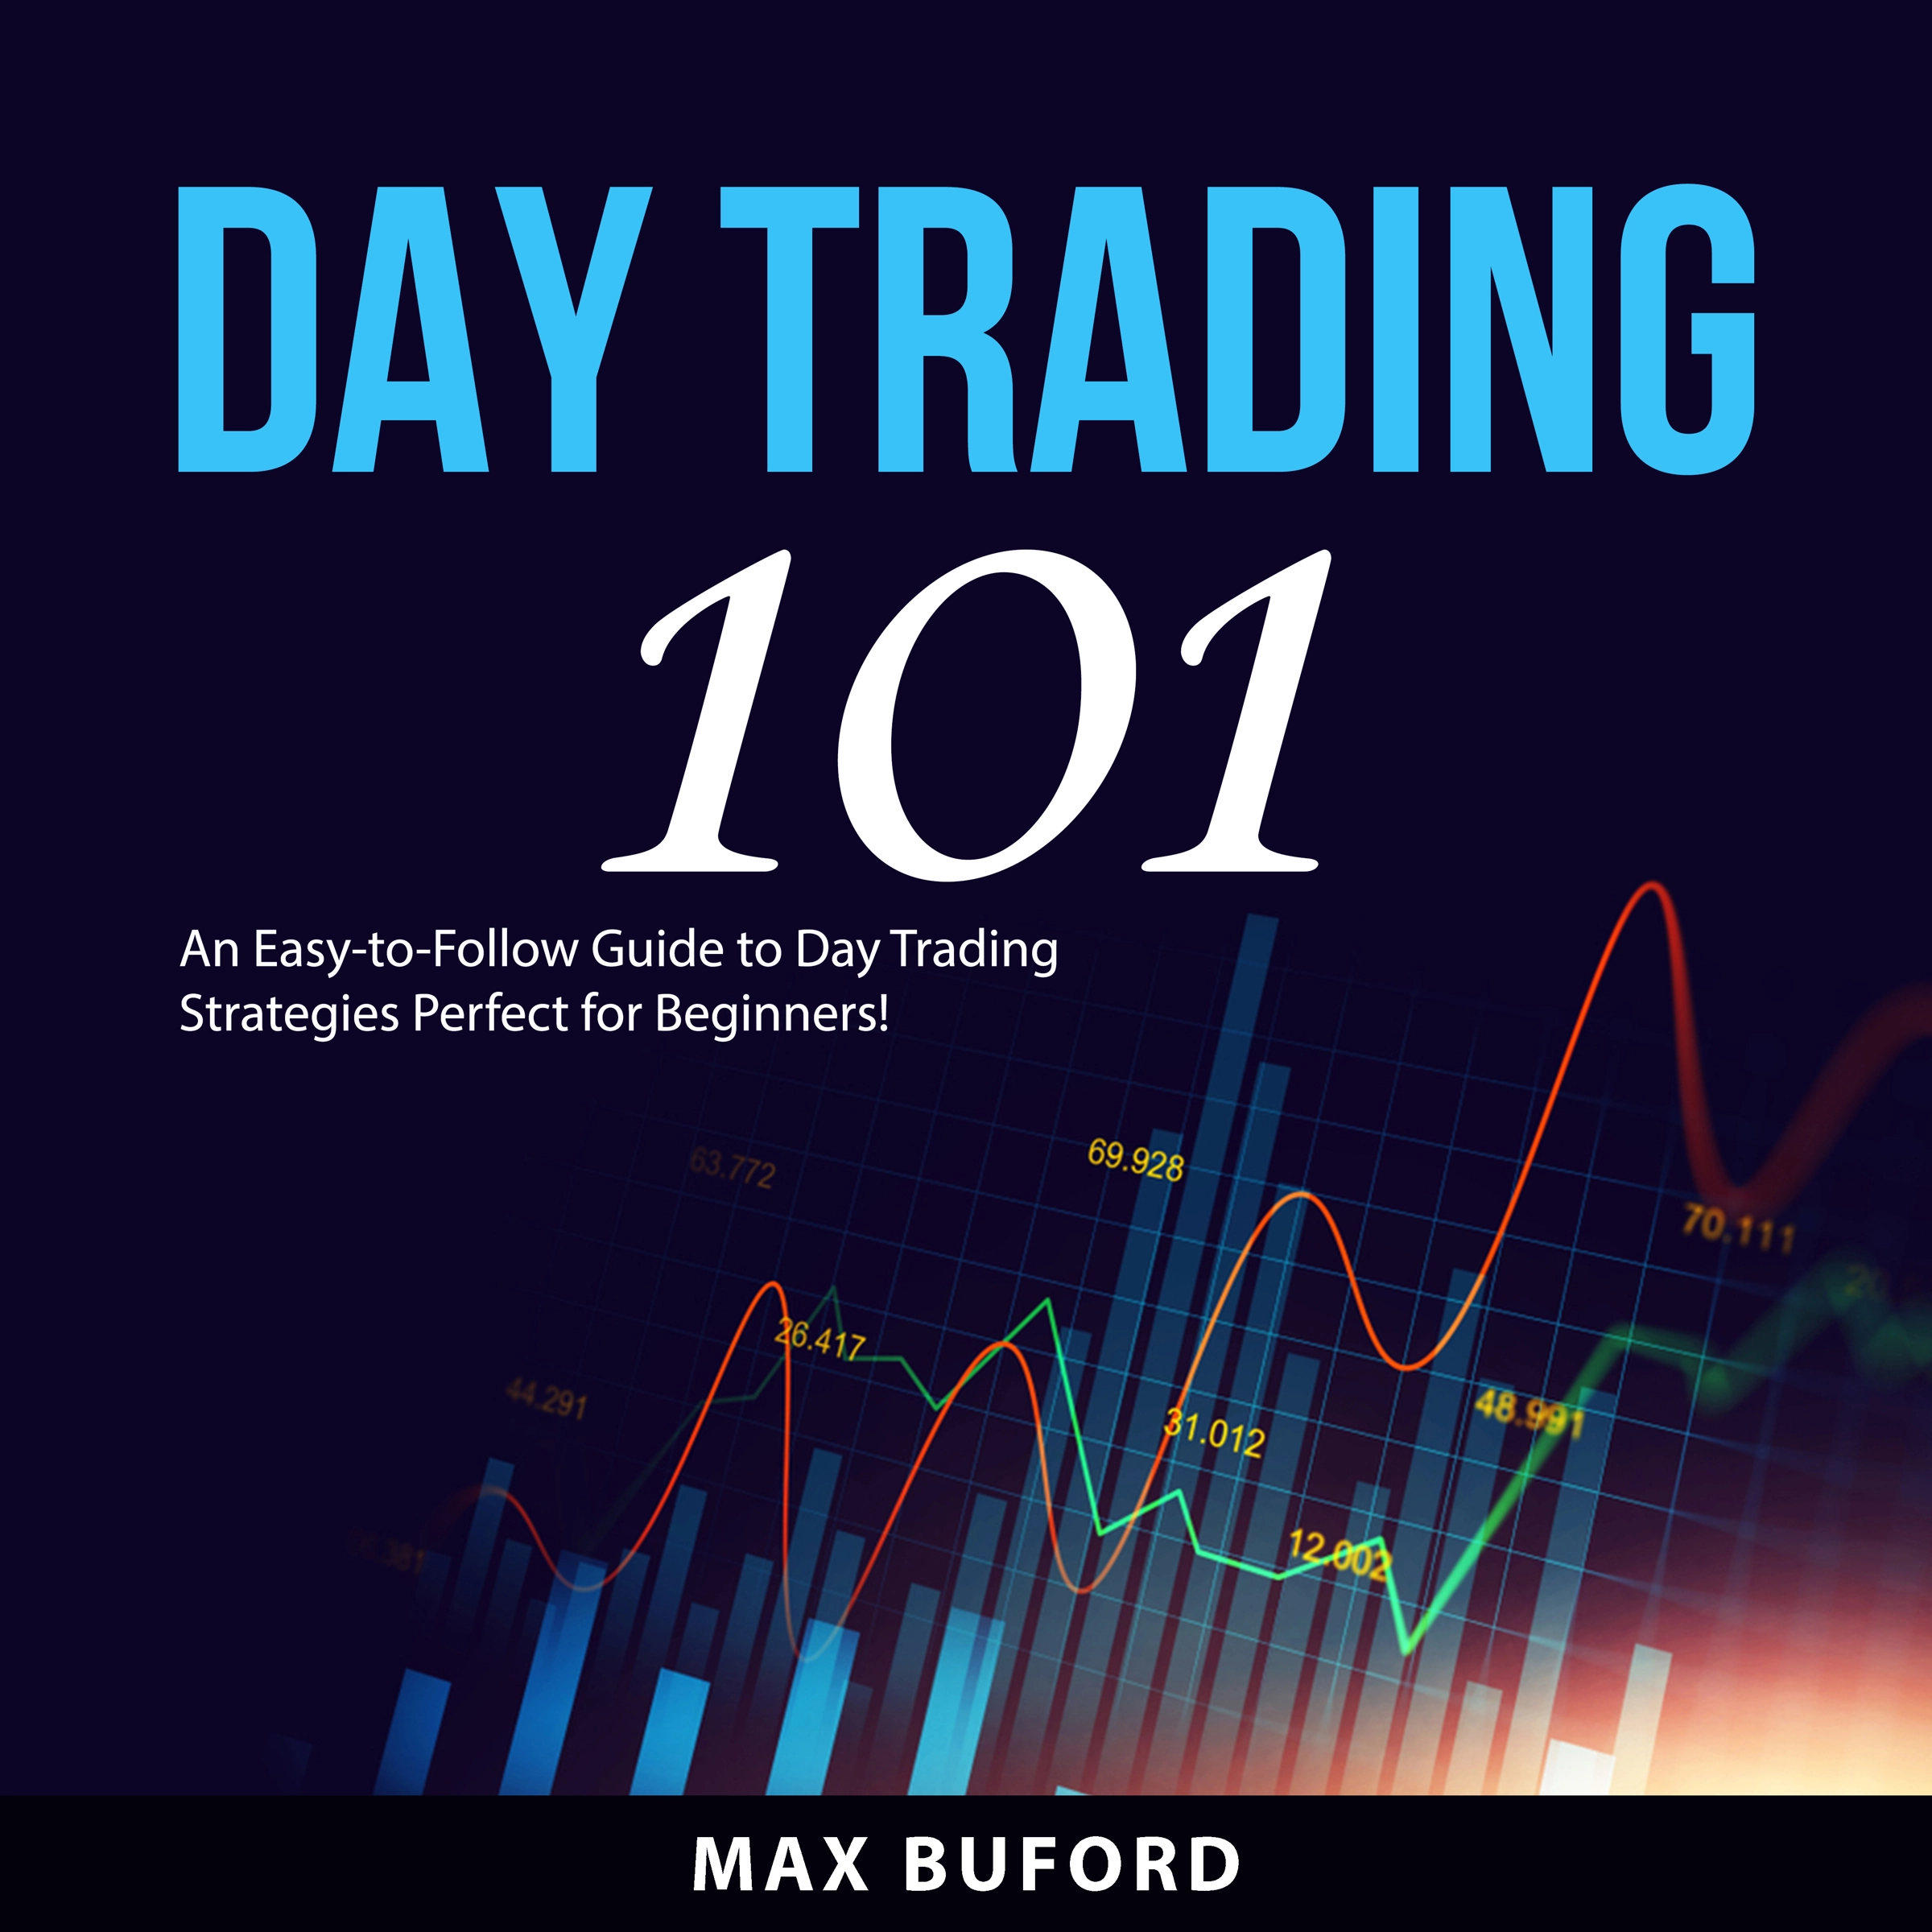 Day Trading 101 Audiobook by Max Buford